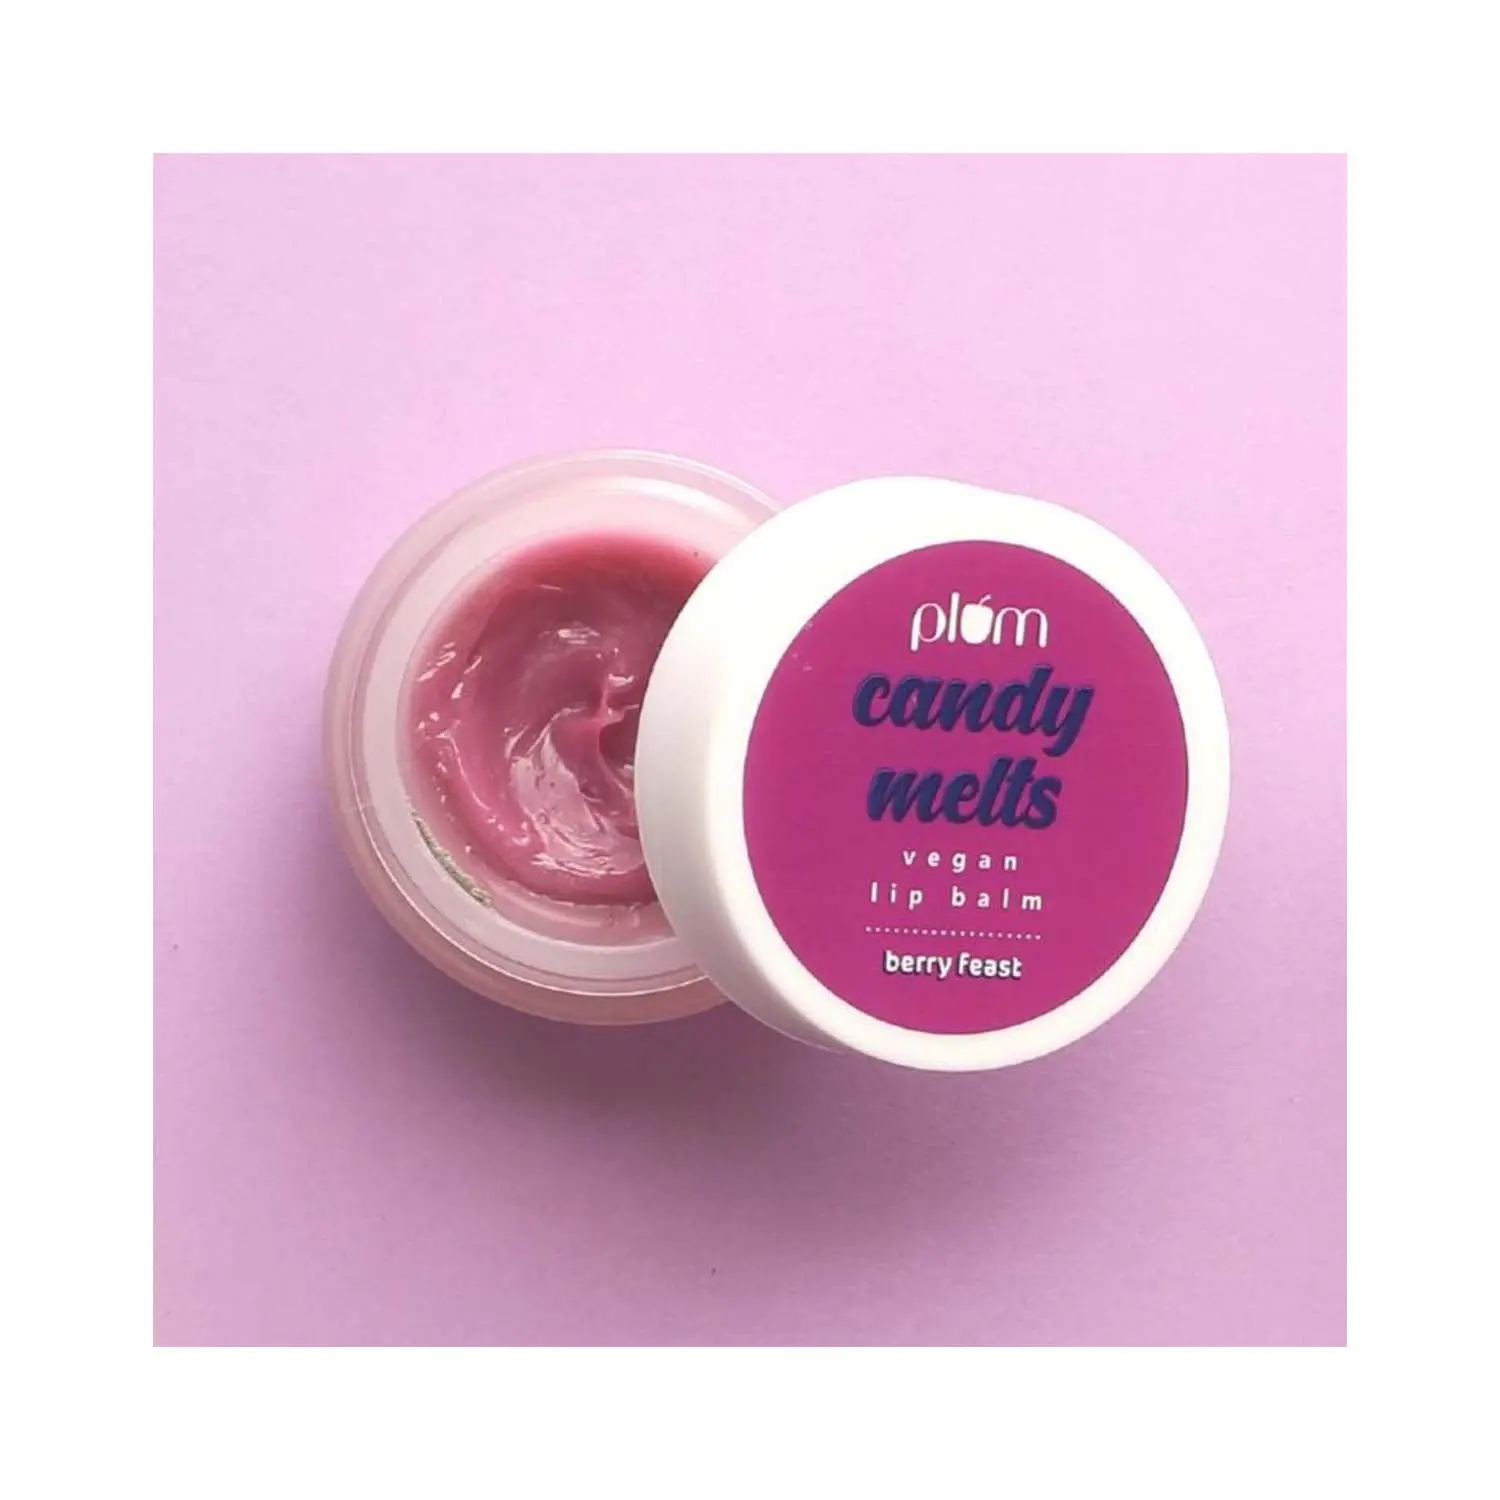 Plum | Plum Candy Melts Vegan Lip Balm Berry Feast, Nourishes & Protects, velvety smooth (12g)